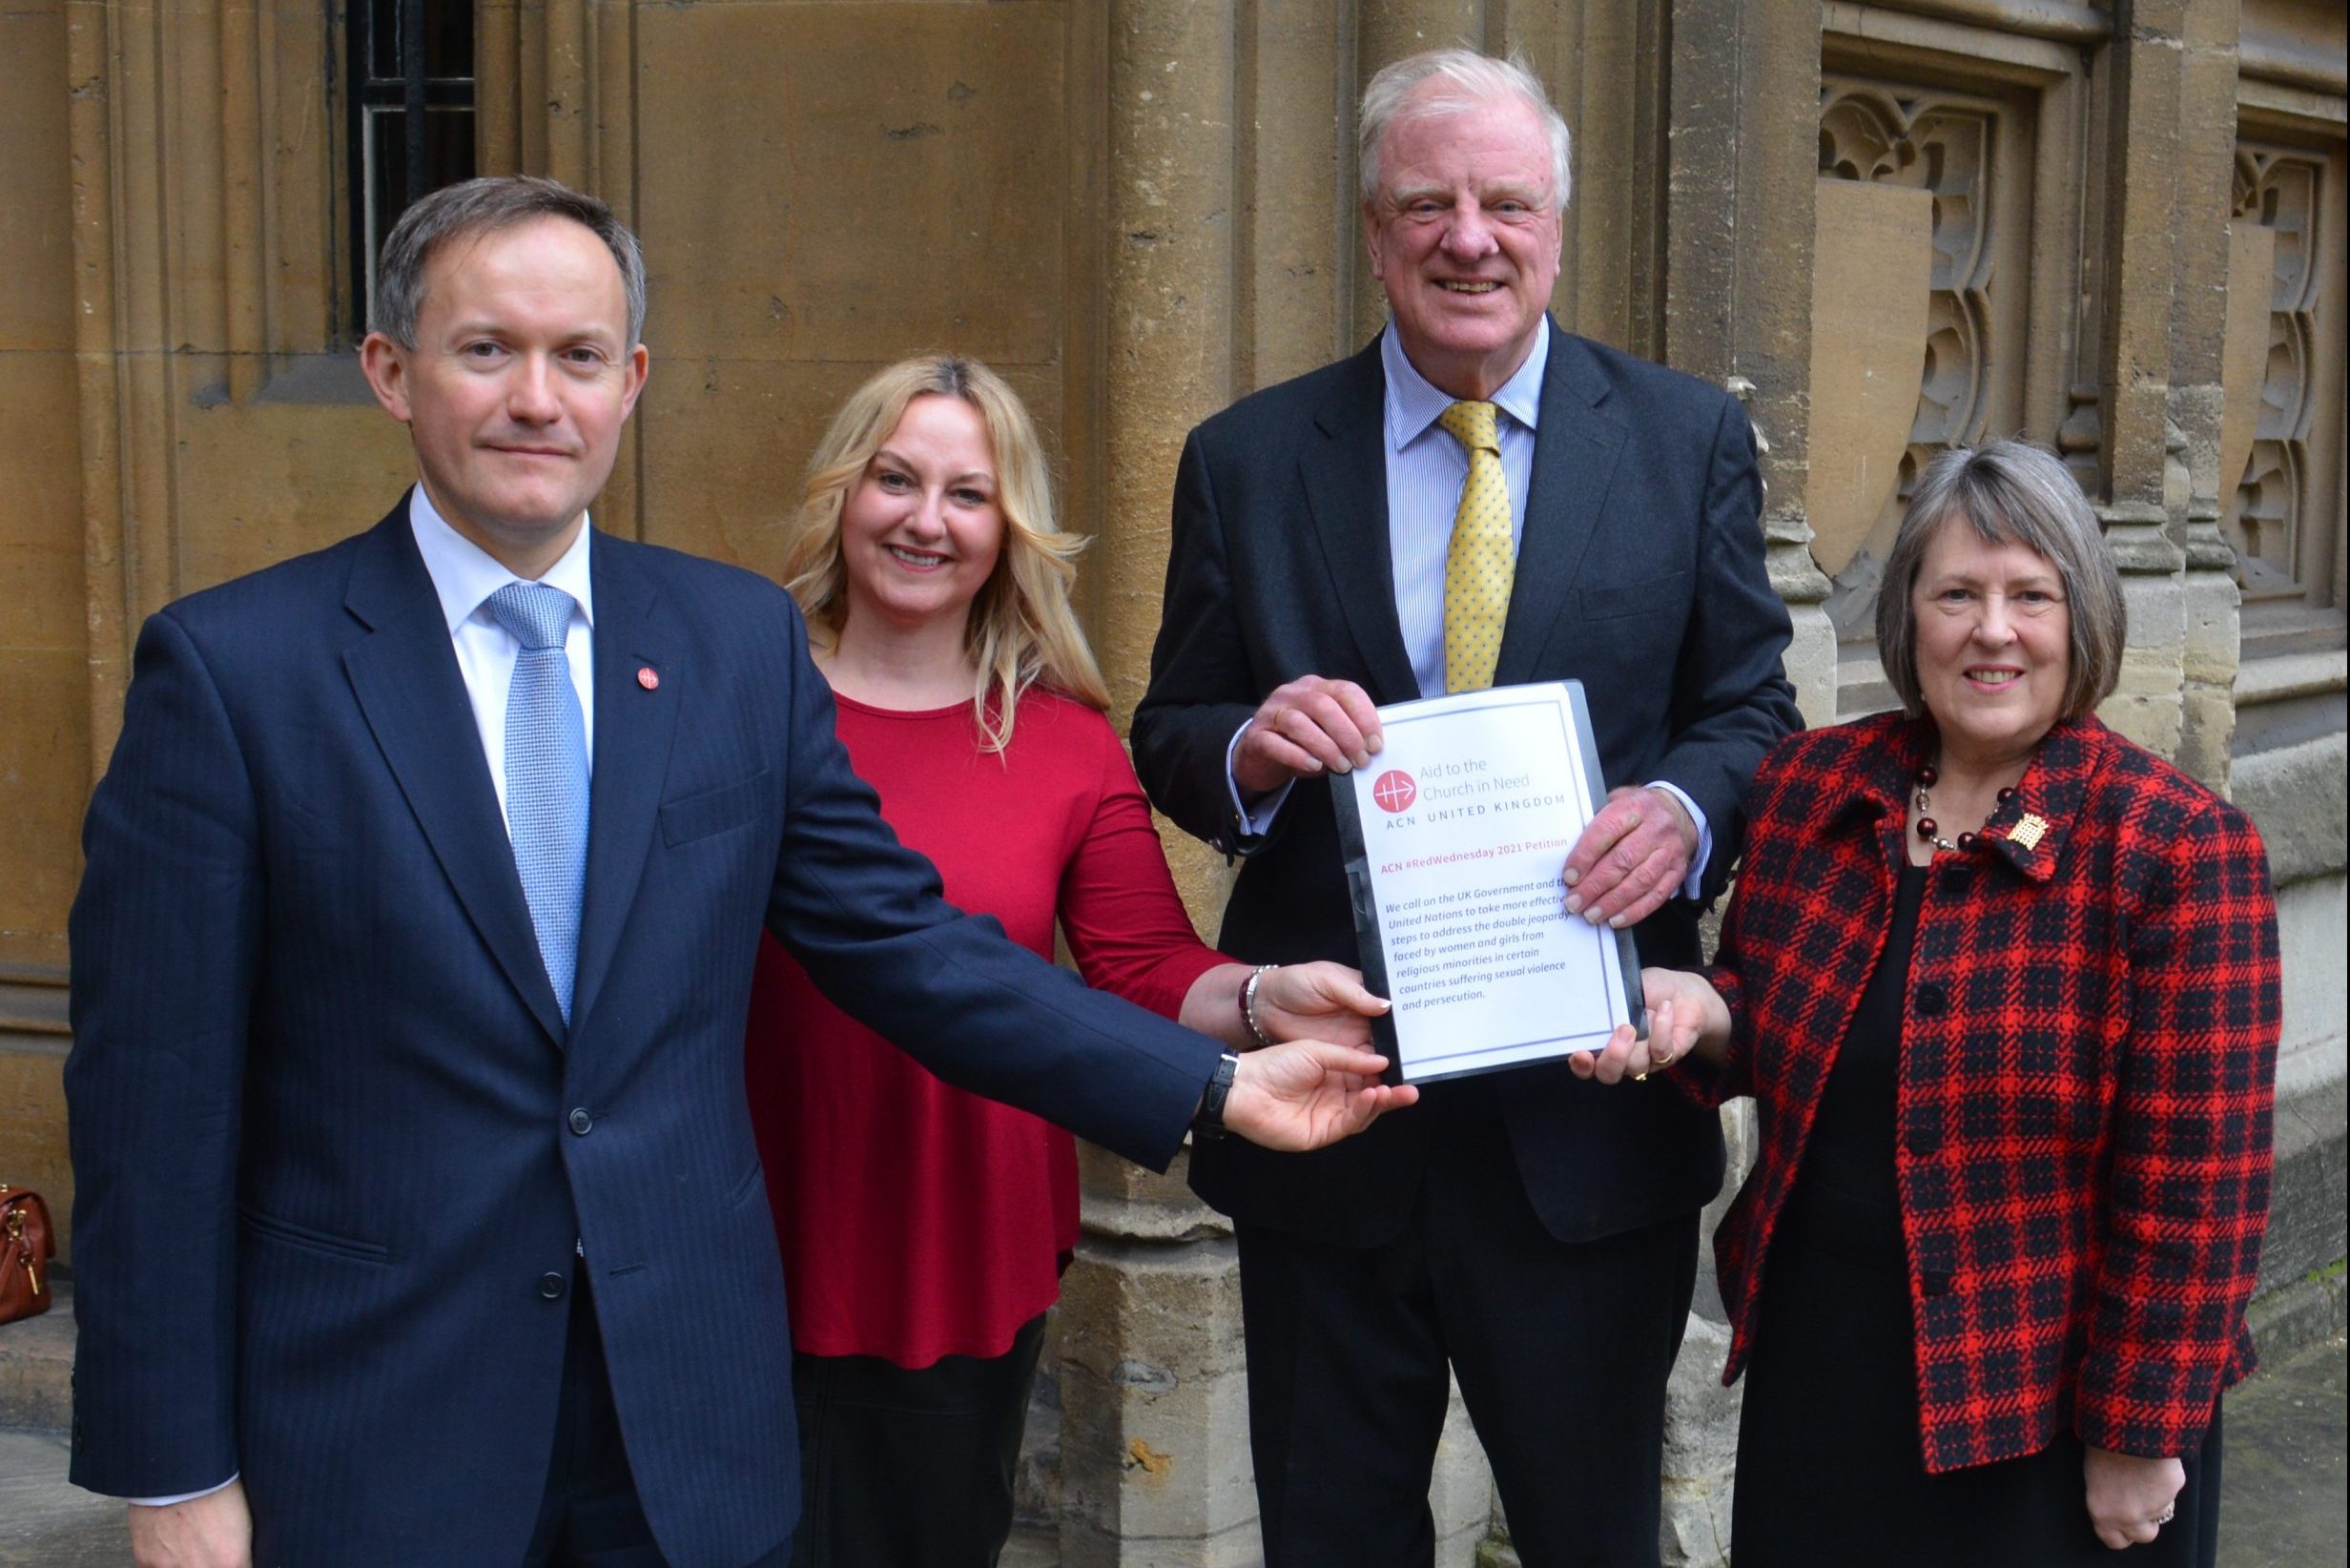 From left to right: ACN (UK) Head of Press and Information John Pontifex, Dr Lisa Cameron MP, Sir Edward Leigh MP and Fiona Bruce MP, the Prime Minister’s Special Envoy for Freedom of Religion or Belief.